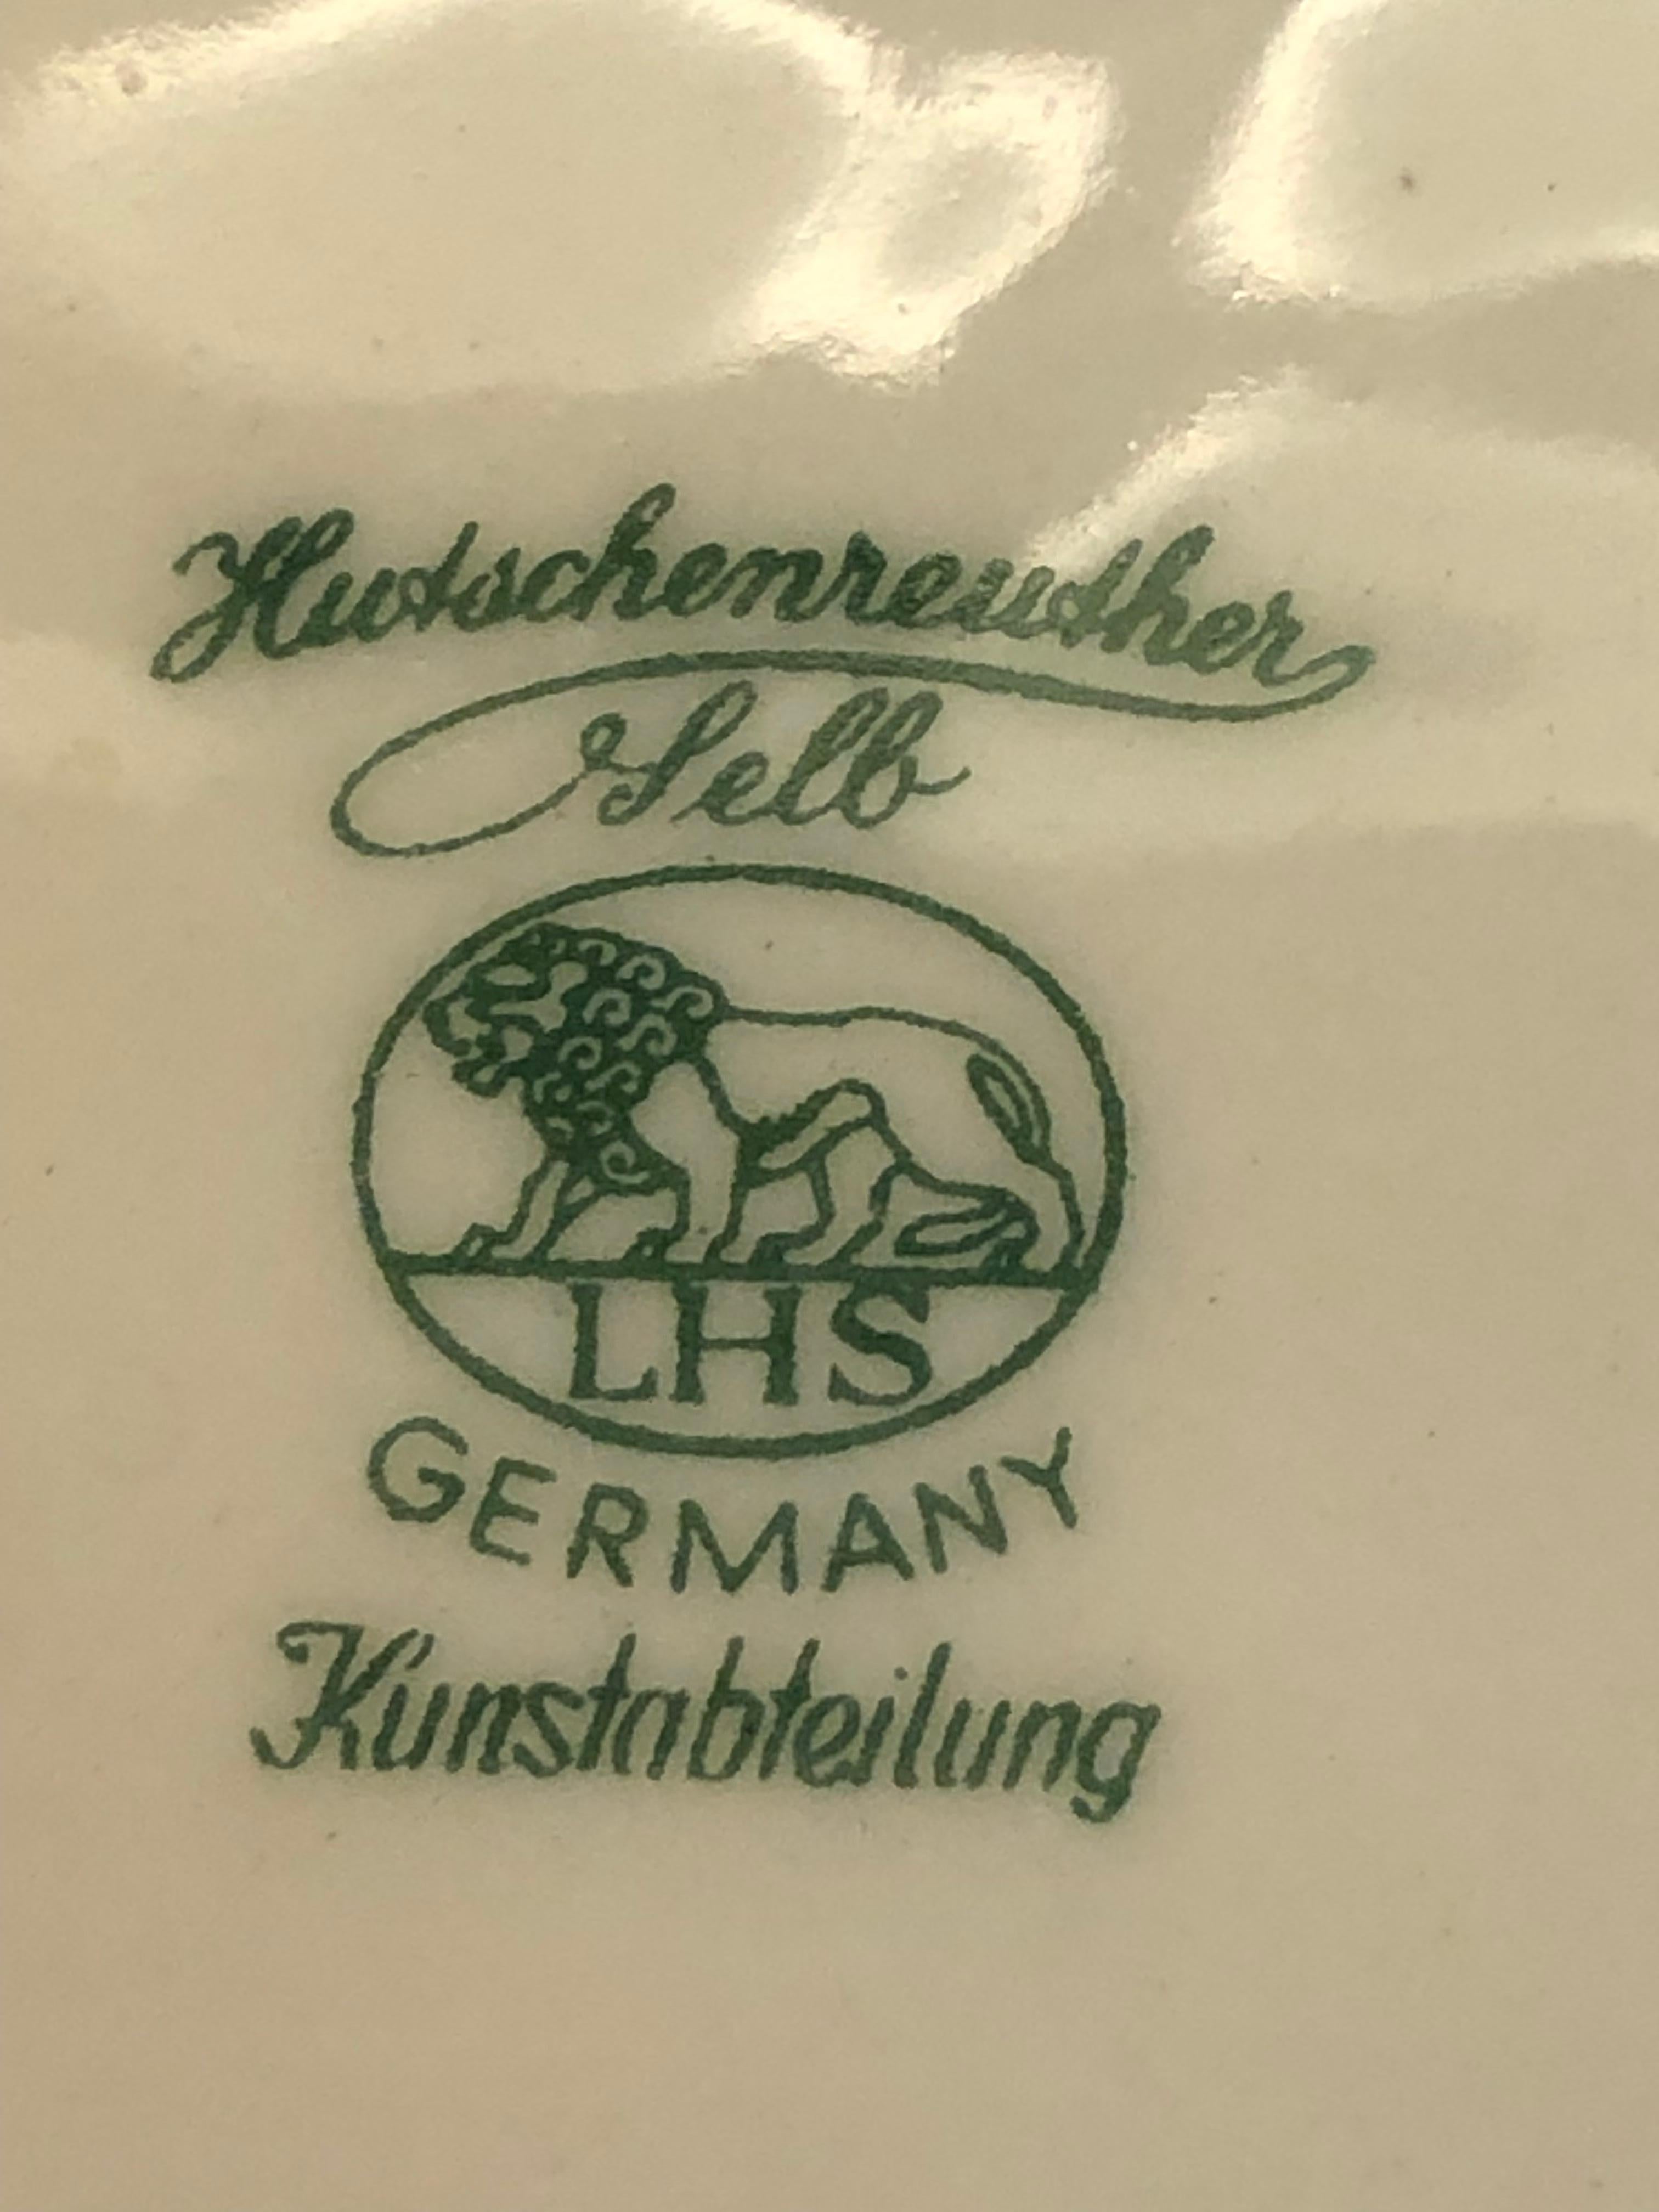 Sign:
Hutschenreuther
Selb
LHS
Kunstabteilung
-------------------
Hutschenreuther
Kunstabteilung
1722/1 Selb
--------------------------------------
The Hutschenreuther porcelain factory started production in 1814. It was established by Carolus